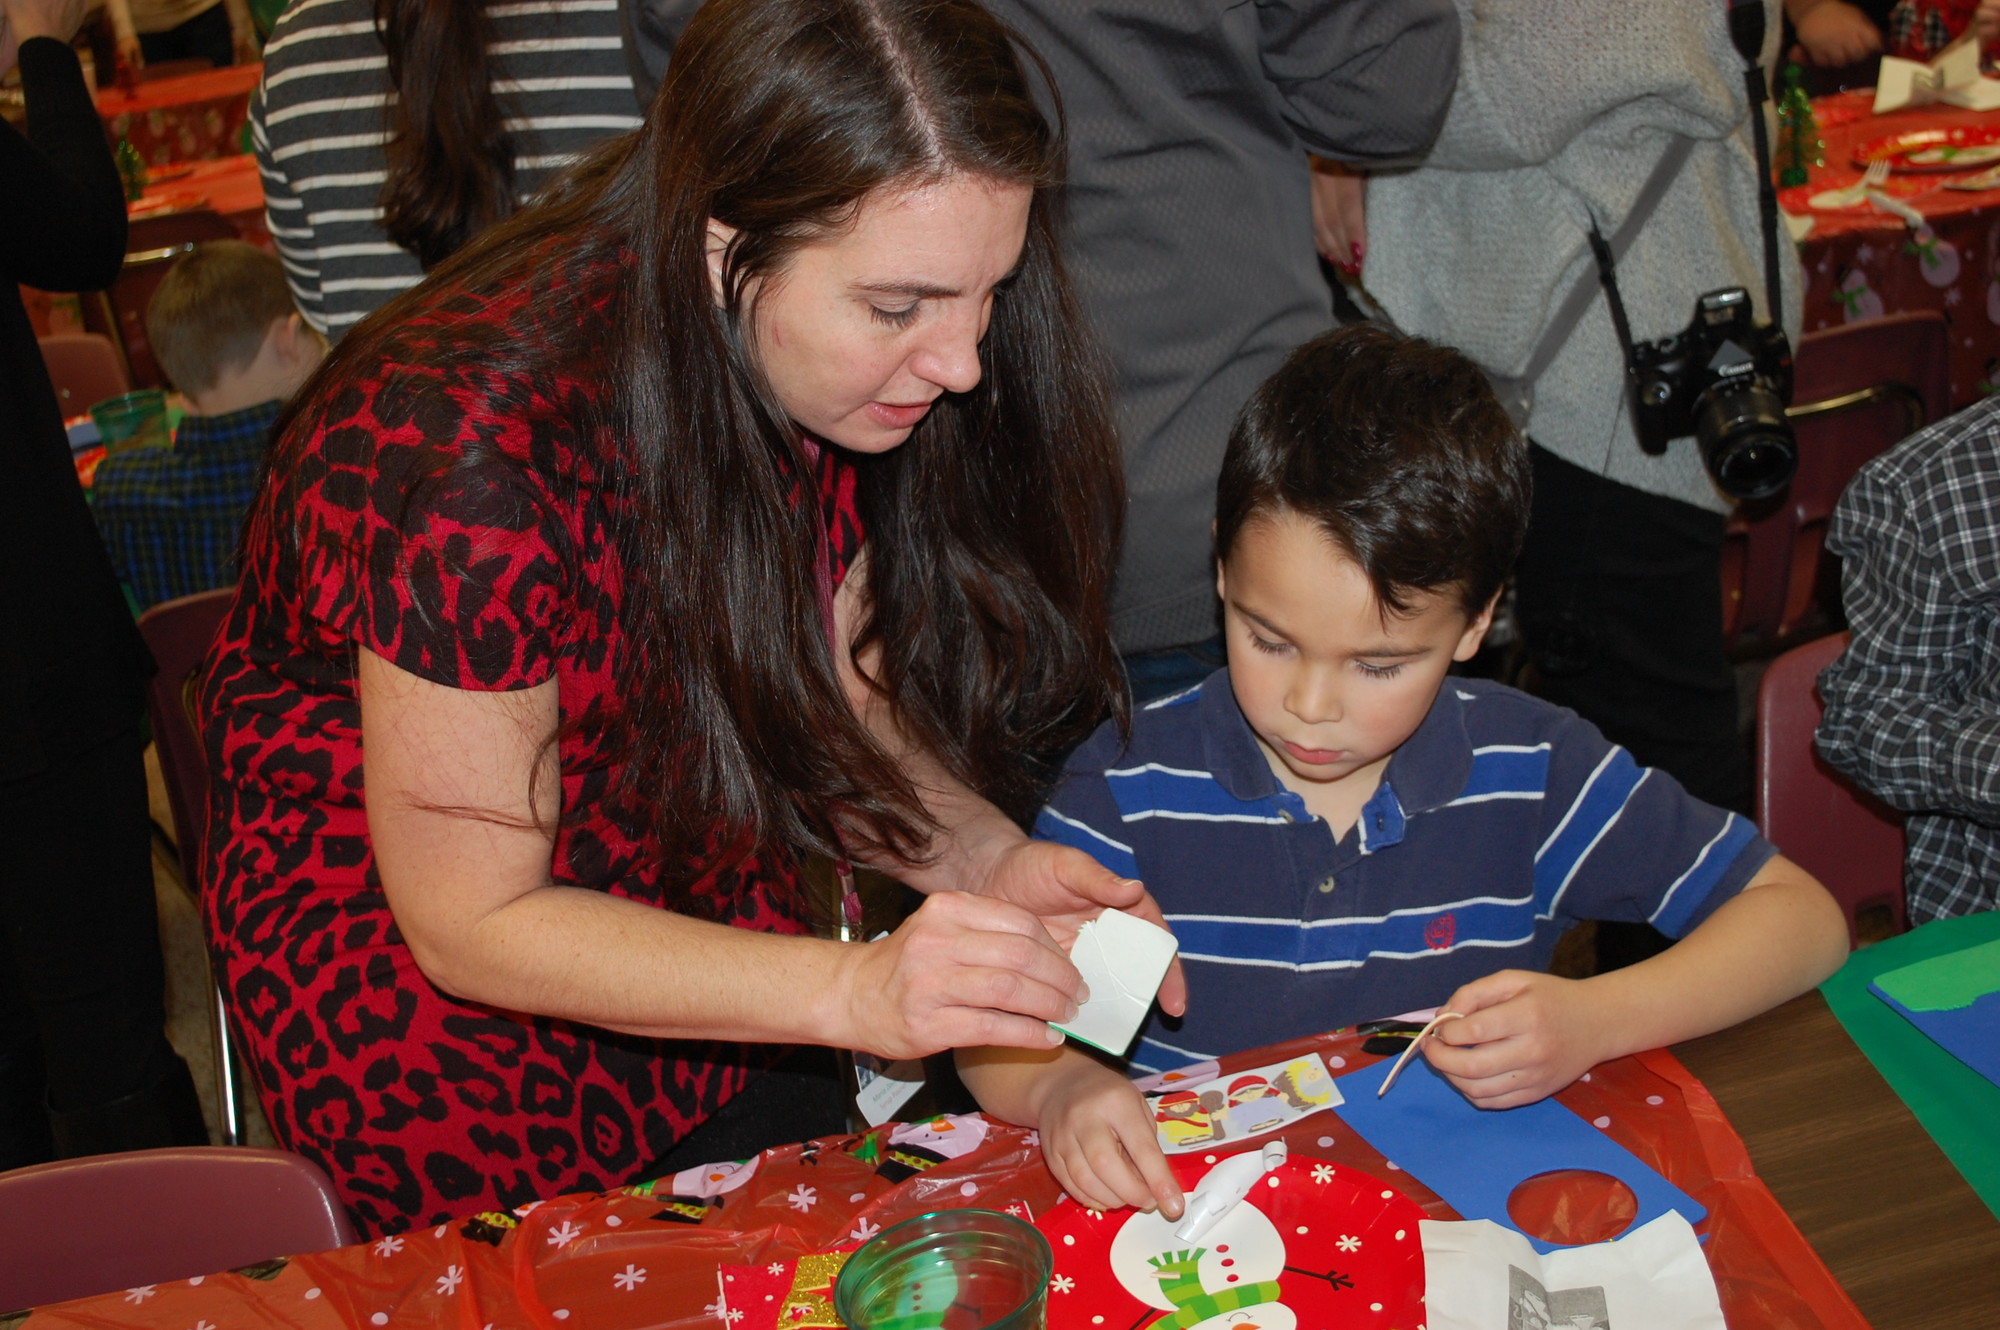 Parent volunteer Maria Zouloufis helped first-grader Evan Rojas with his craft.